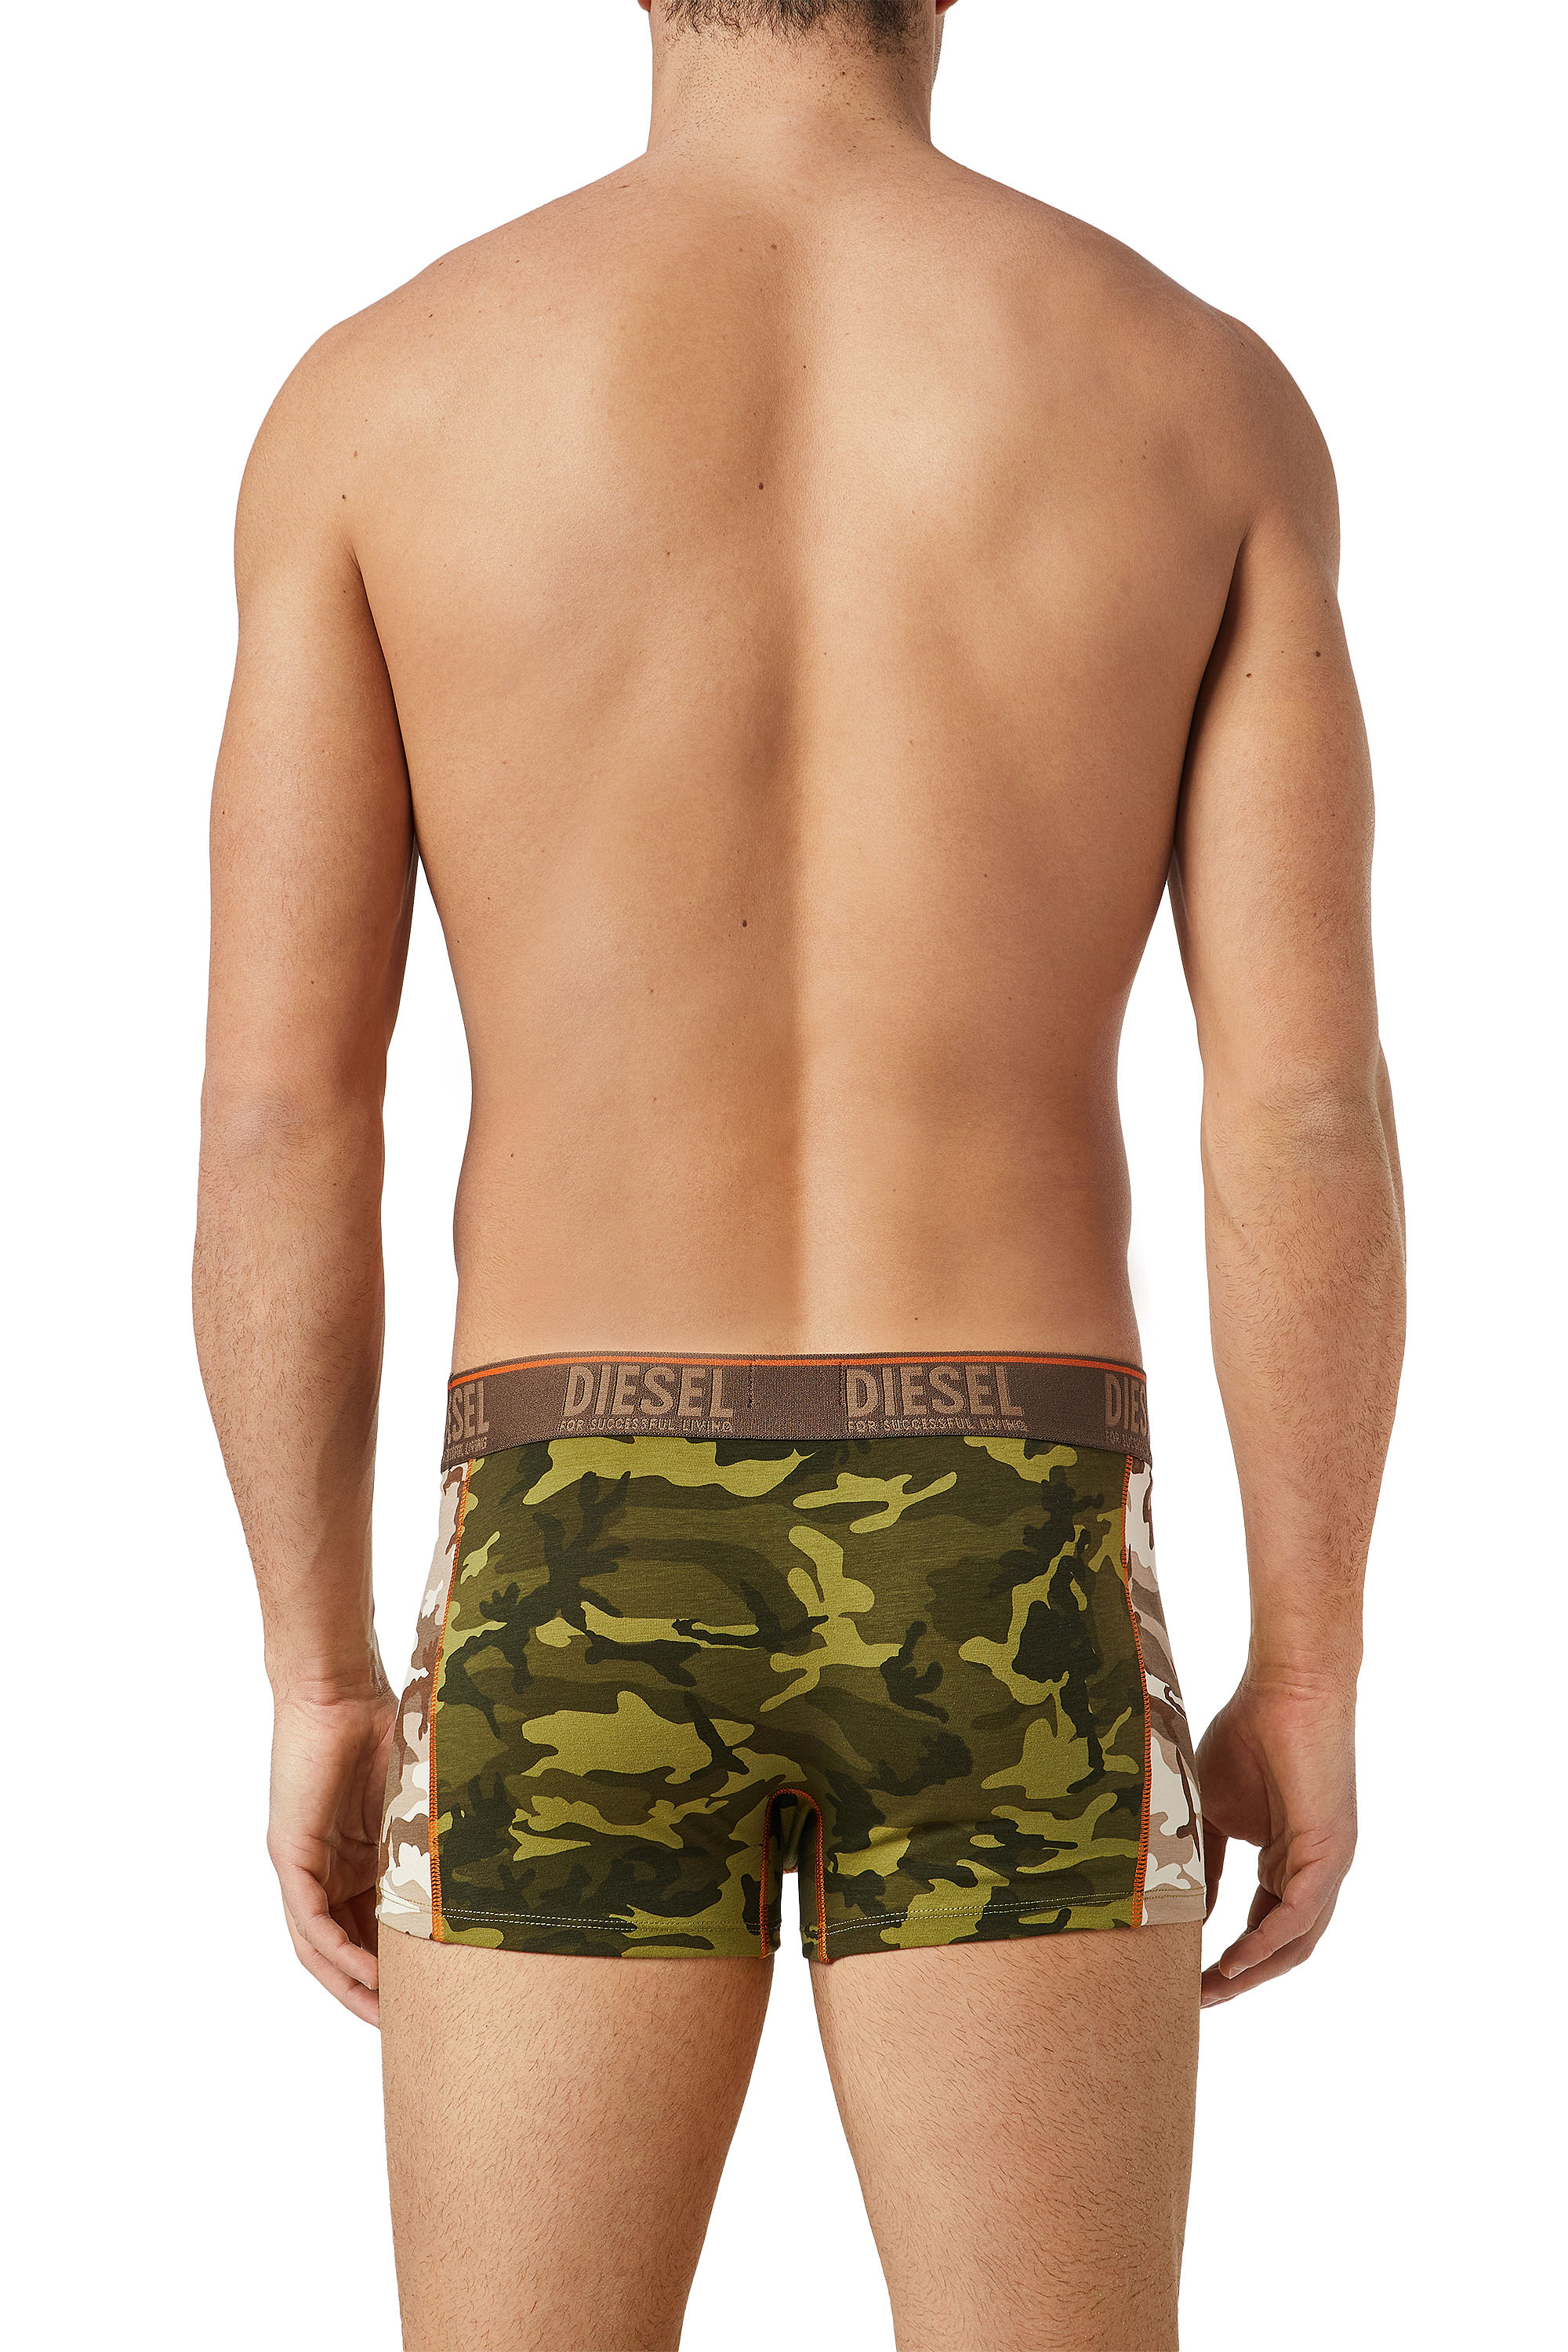 3 Mens Classic Underwear Sports Cotton Boxer Shorts Trunks Army Camouflage S-2XL 